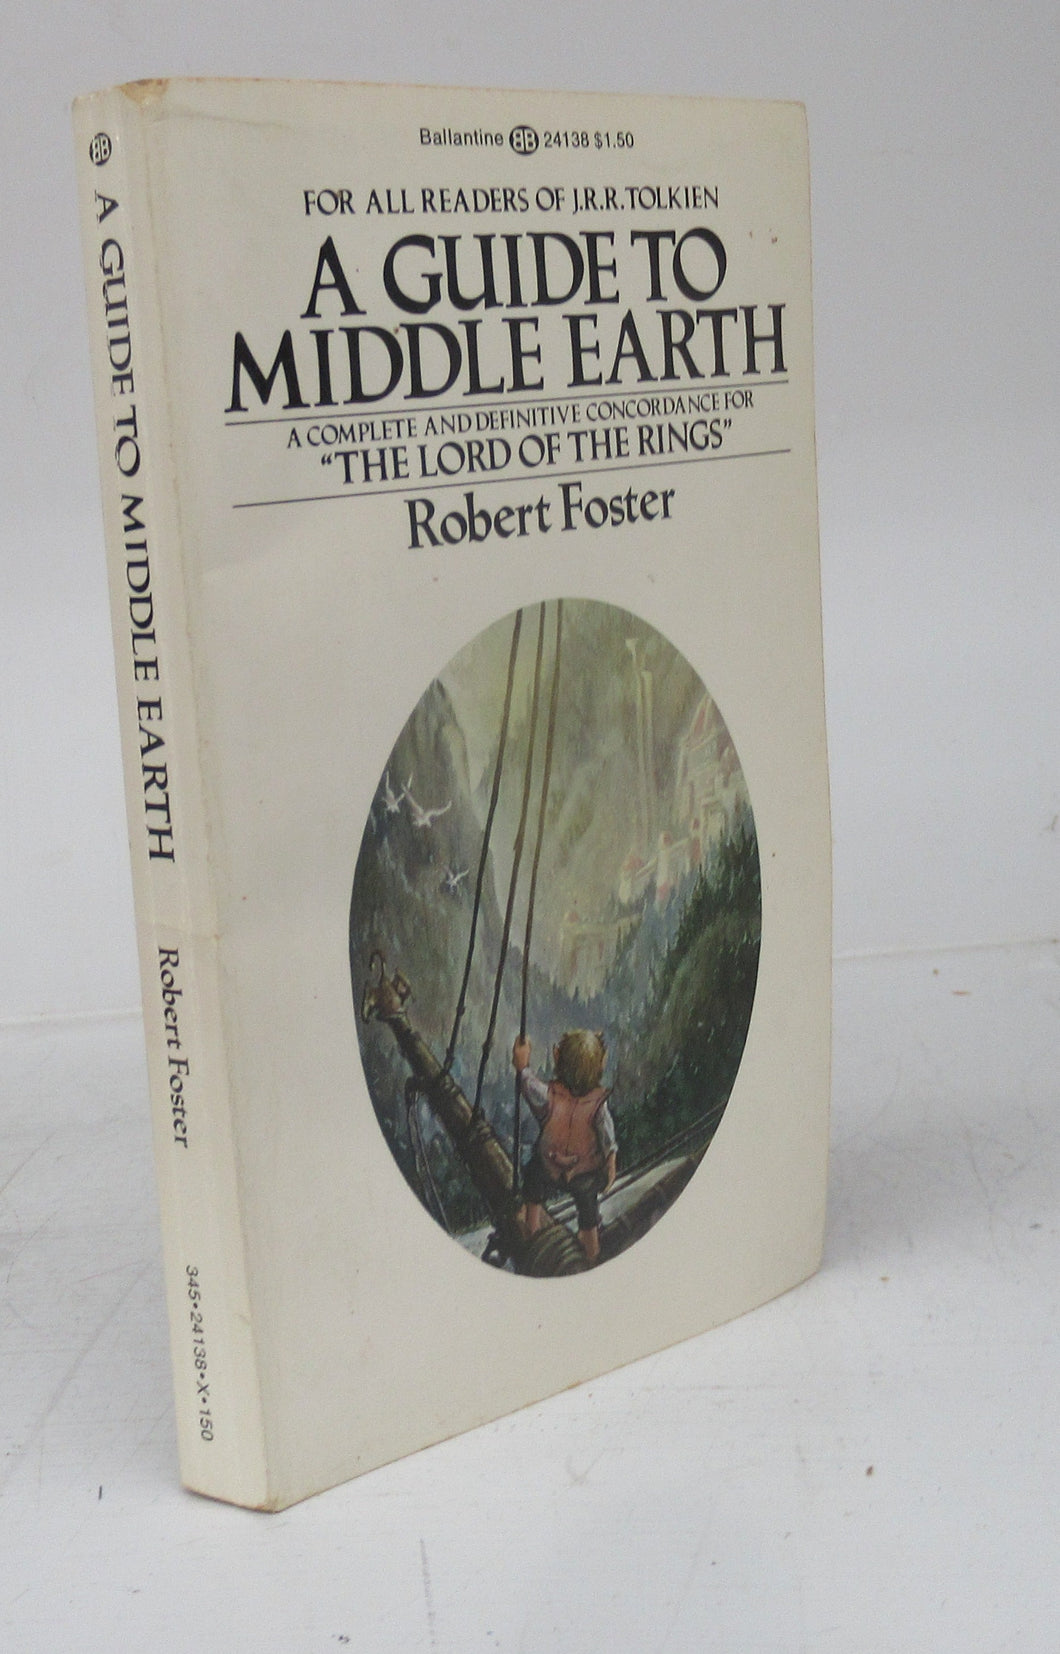 A Guide to Middle Earth: A Complete and Definitive Concordance ofor "The Lord of the Rings"